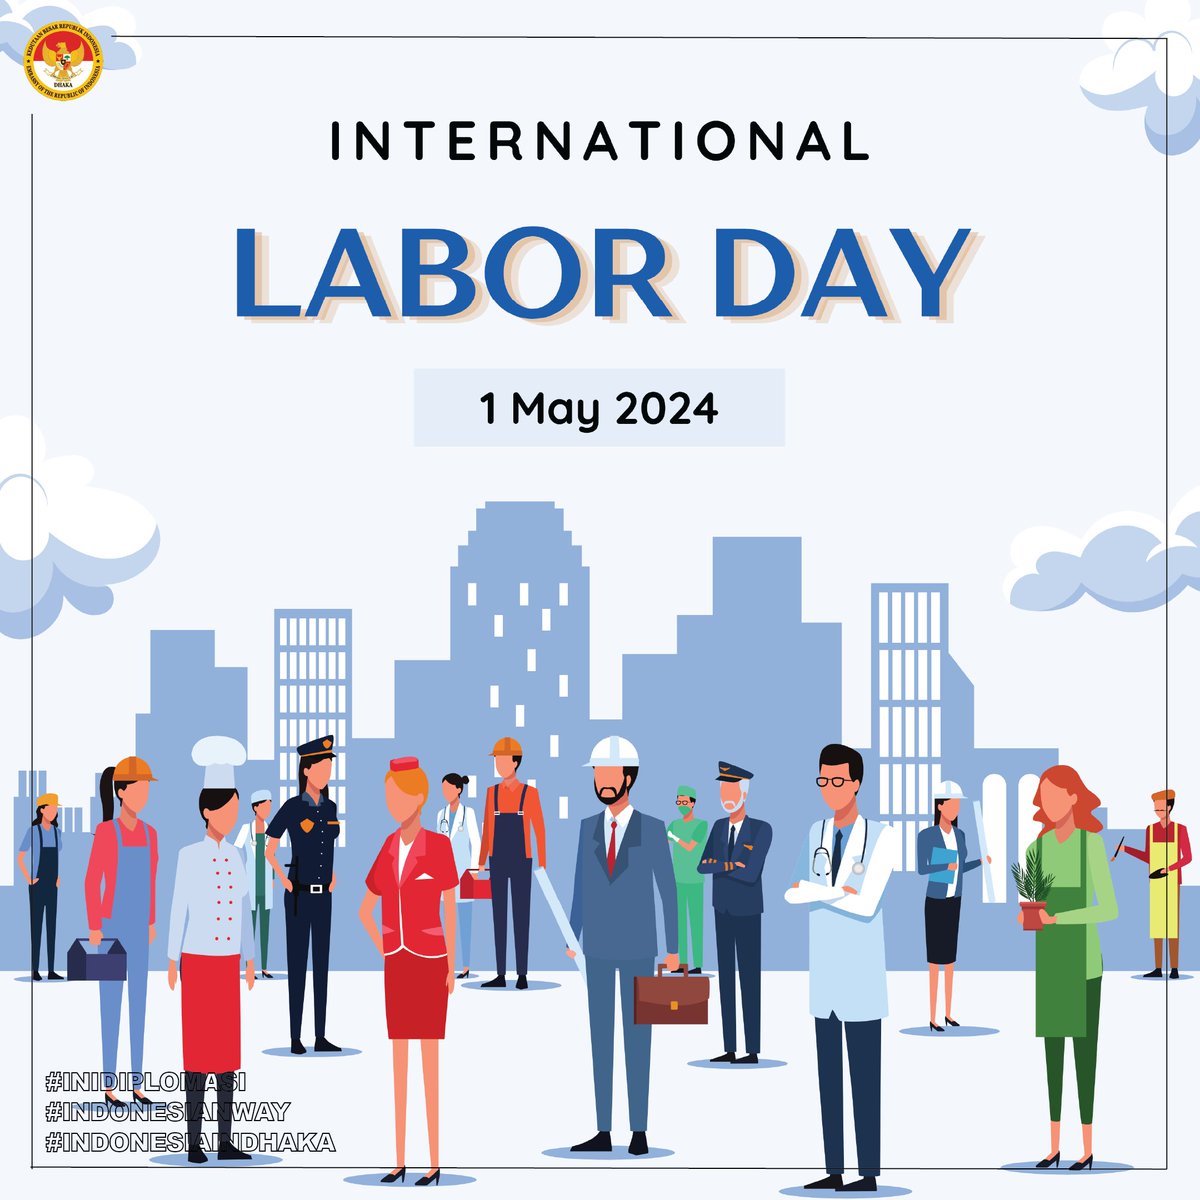 Happy International Labor Day! Let's take a moment to express the highest appreciation for all workers around the world for their hard work, dedication, and direct contribution for the betterment of the workforce.

#IniDiplomasi
#RintisKemajuan
#LaborDay
#HariBuruh